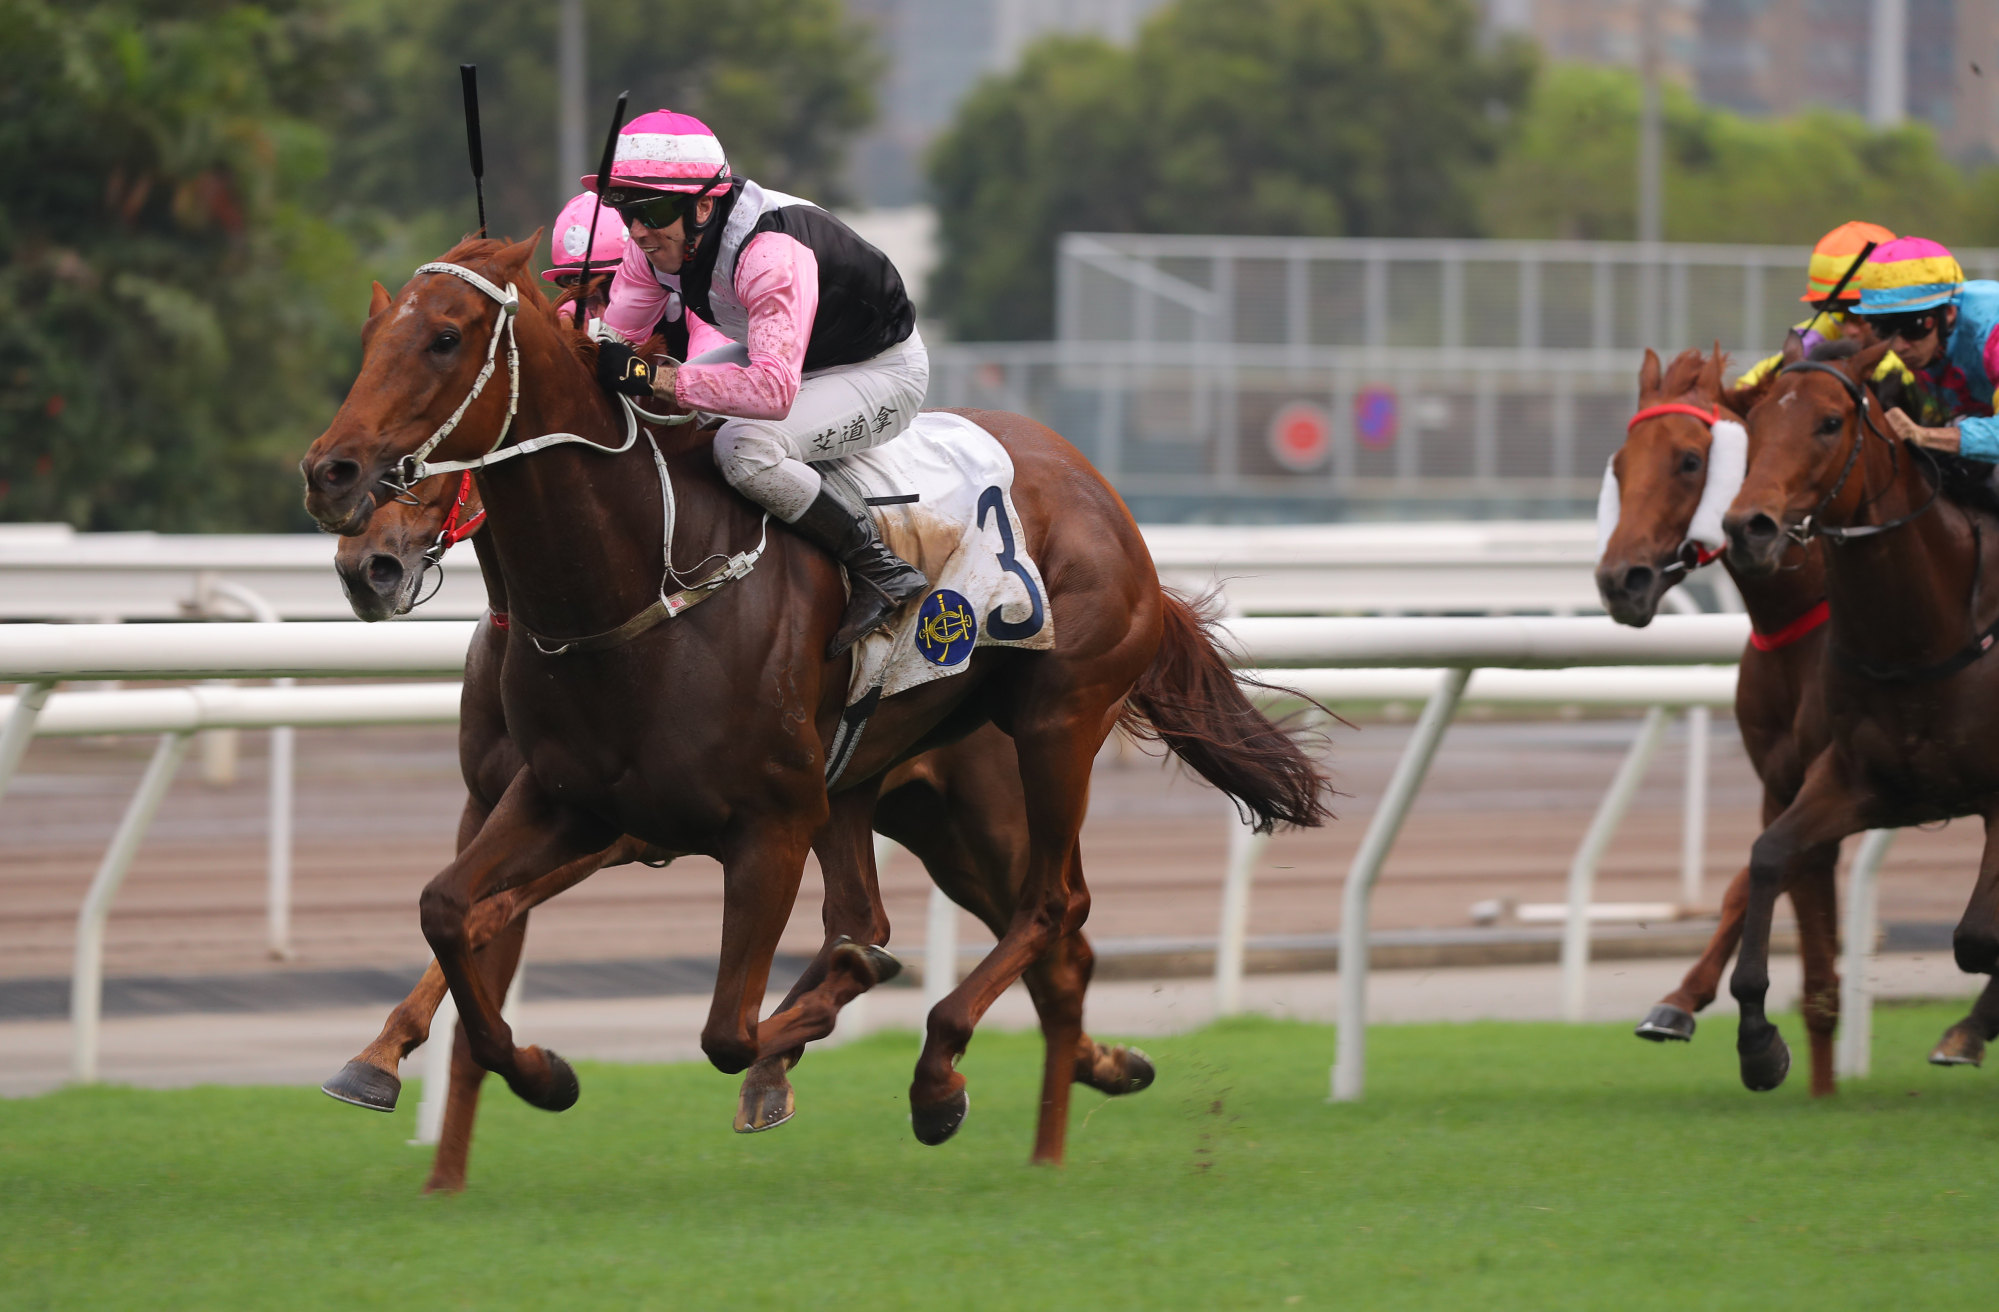 Brenton Avdulla guides Beauty Joy to victory in the Chairman’s Trophy.